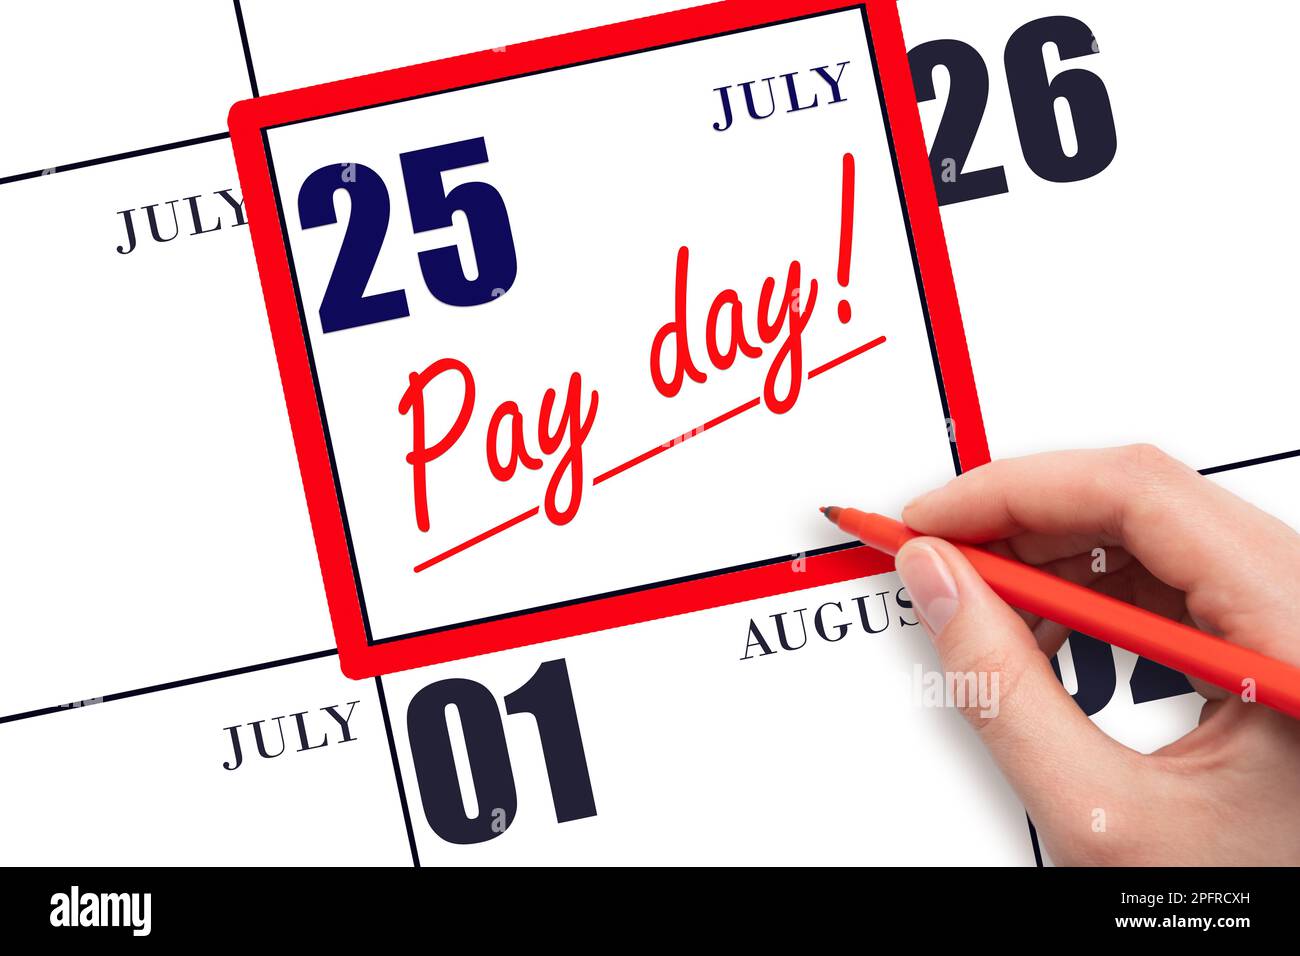 25th day of July. Hand writing text PAY DATE on calendar date July 25 and underline it. Payment due date.  Reminder concept of payment. Summer month, Stock Photo